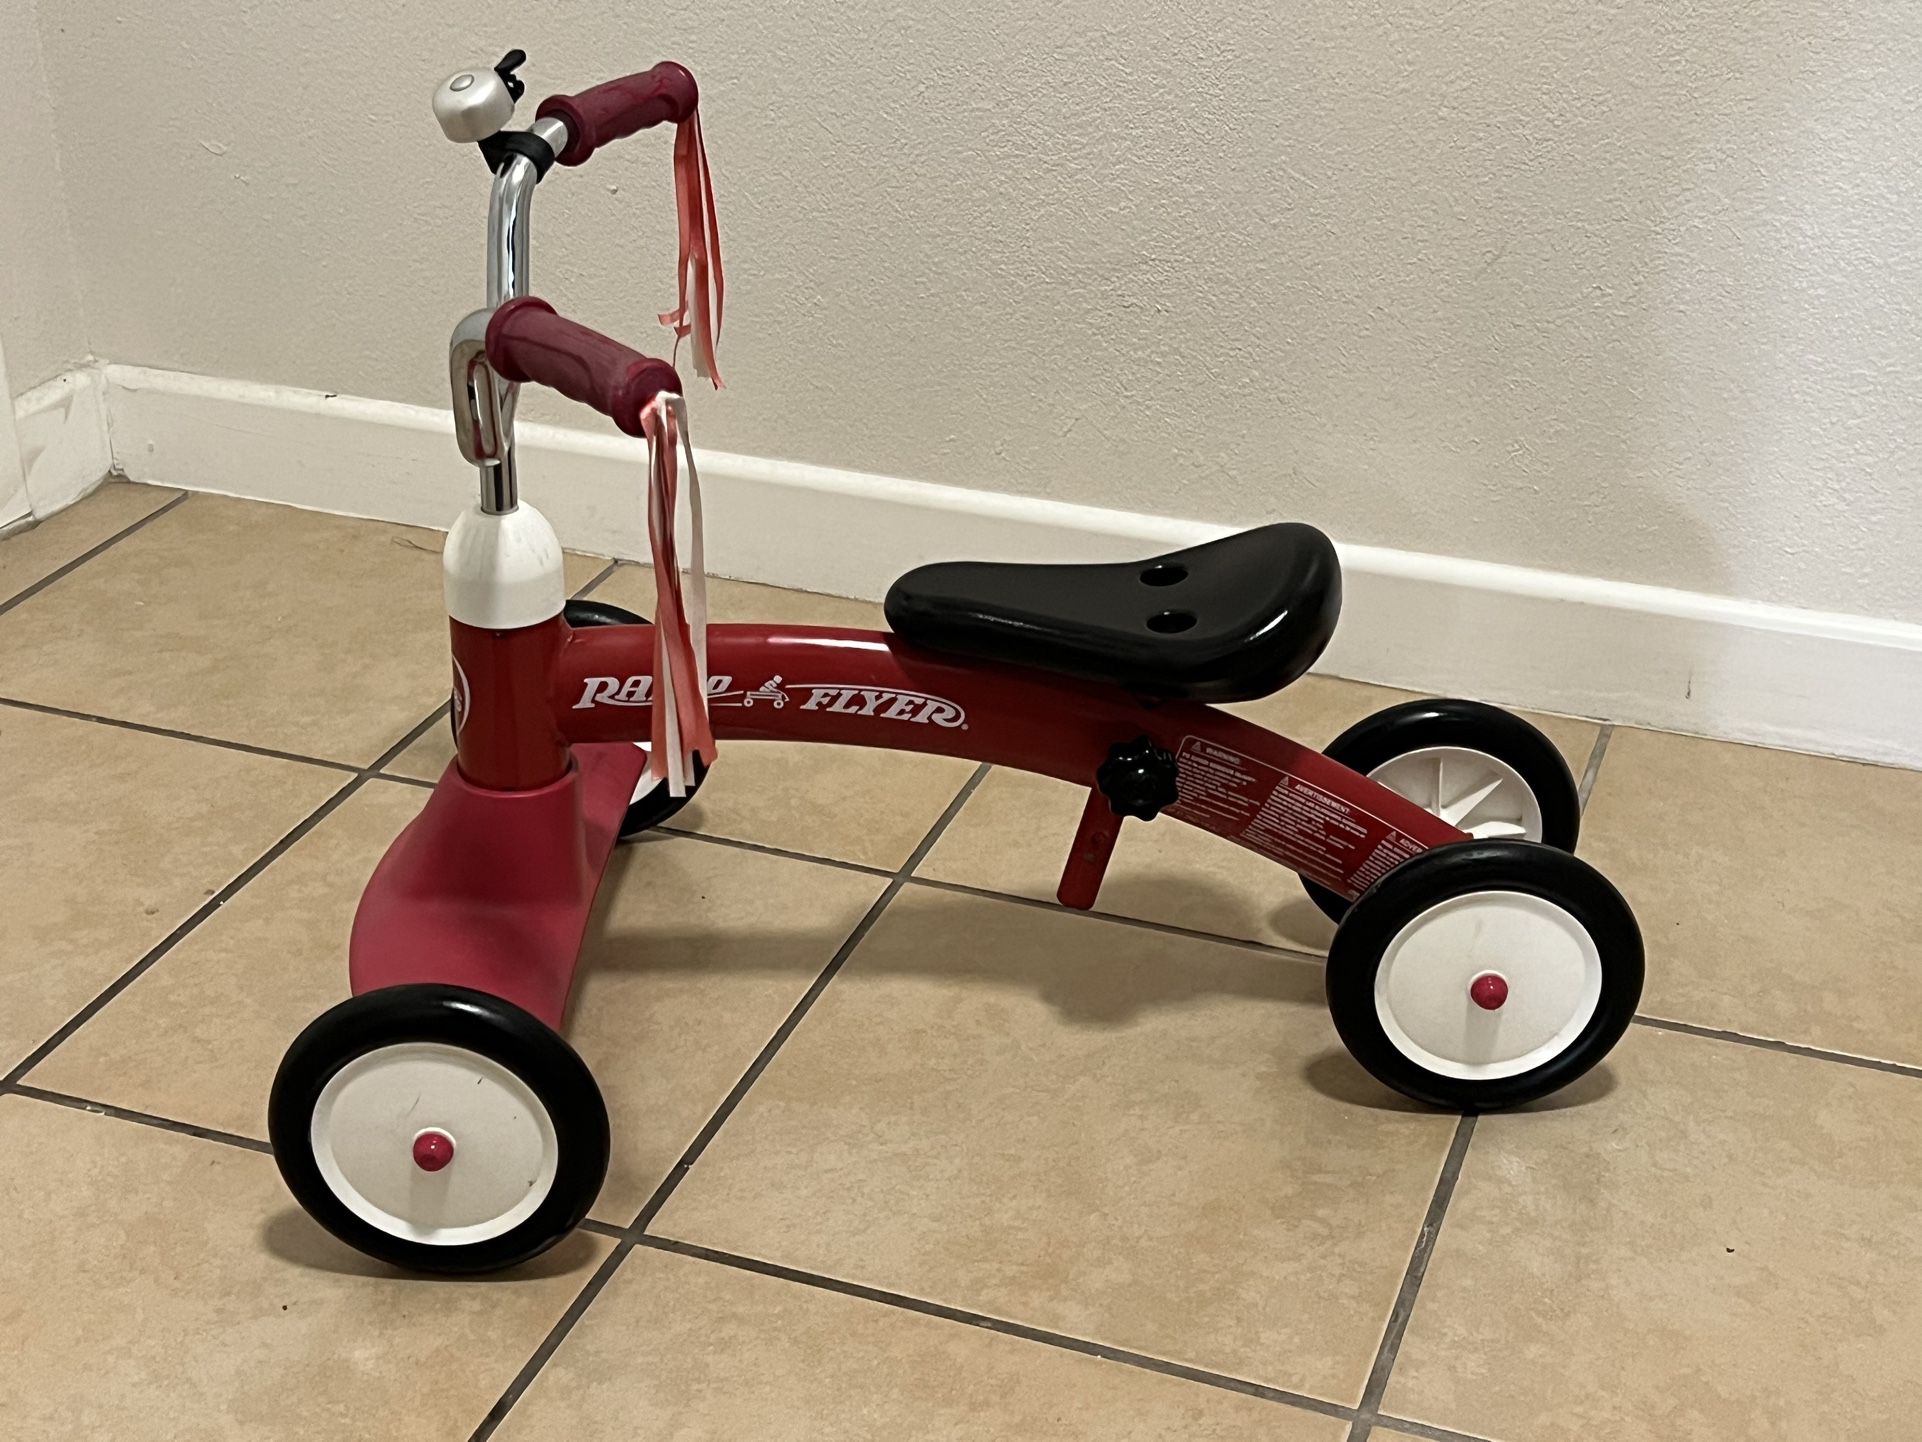 Radio Flyer Scoot-About, Toddler Ride On Toy, Kids Ride On Toy for Ages 1-3, 23.5" Large x 14.5" W x 16.5" H